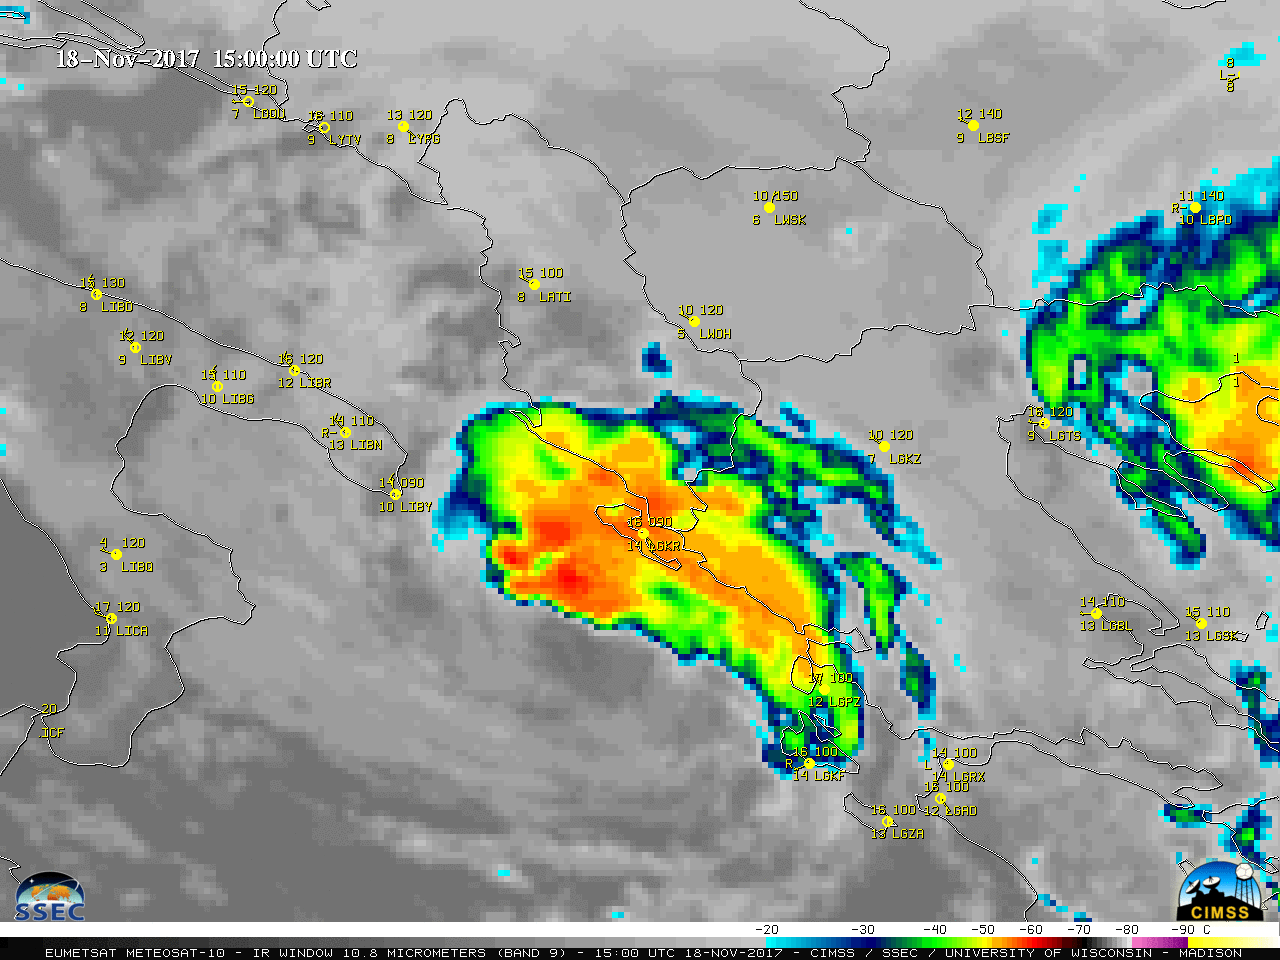 Meteosat-10 Infrared Window (10.8 µm) images, with plots of hourly surface reports [click to play MP4 animation]